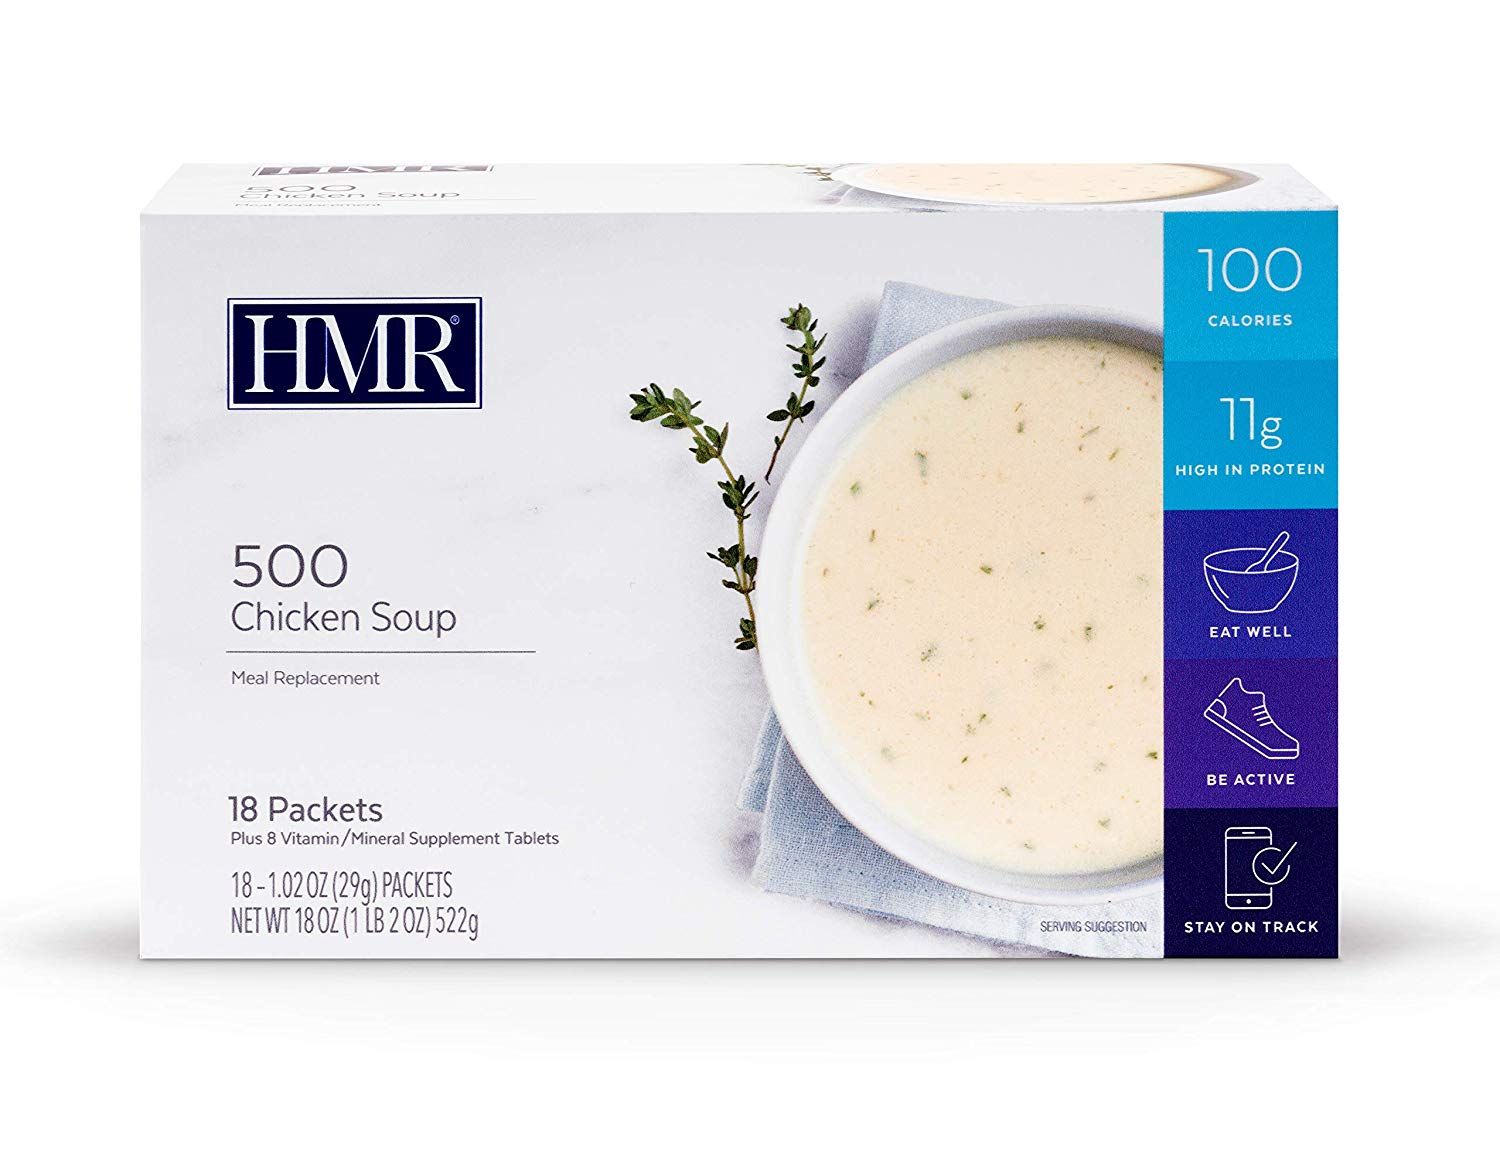 HMR 500 Chicken Soup, Meal Replacement, 100 Calories, Box ...